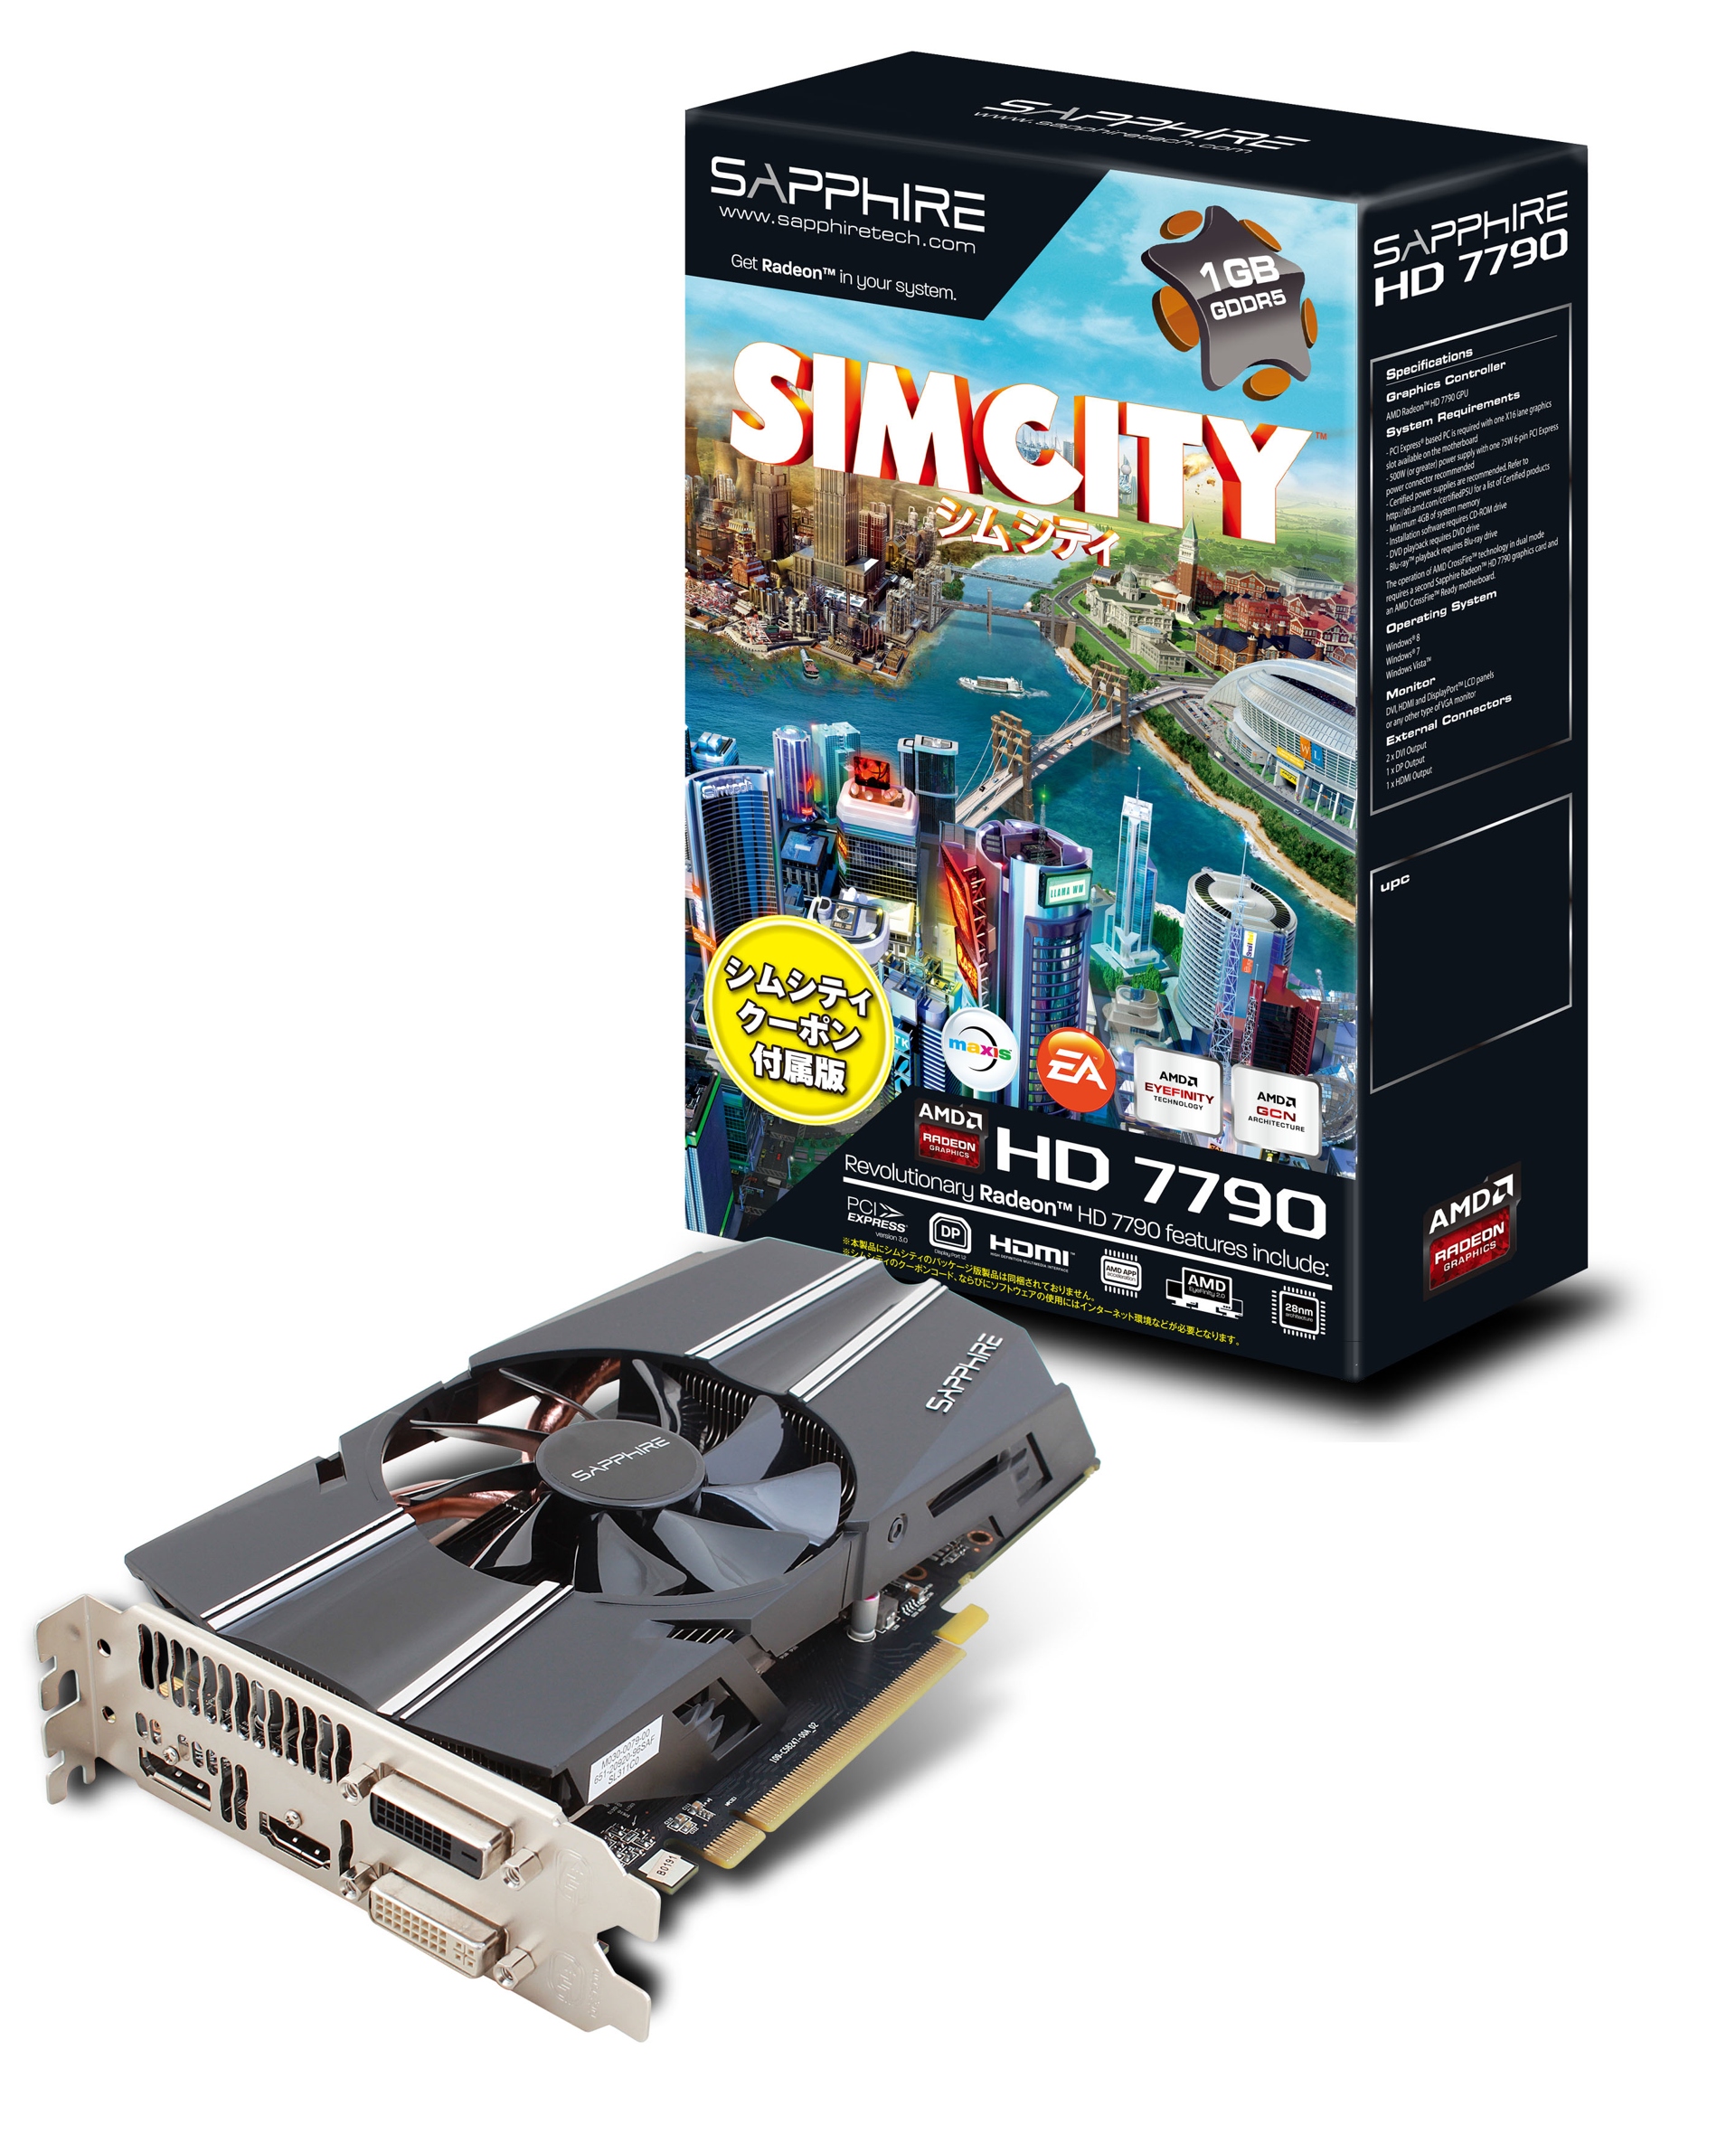 Media asset in full size related to 3dfxzone.it news item entitled as follows: Sapphire introduce la video card Radeon HD 7790 SimCity Edition | Image Name: news19476_HD7790_SIMCITY_1GBGDDR5_2.jpg